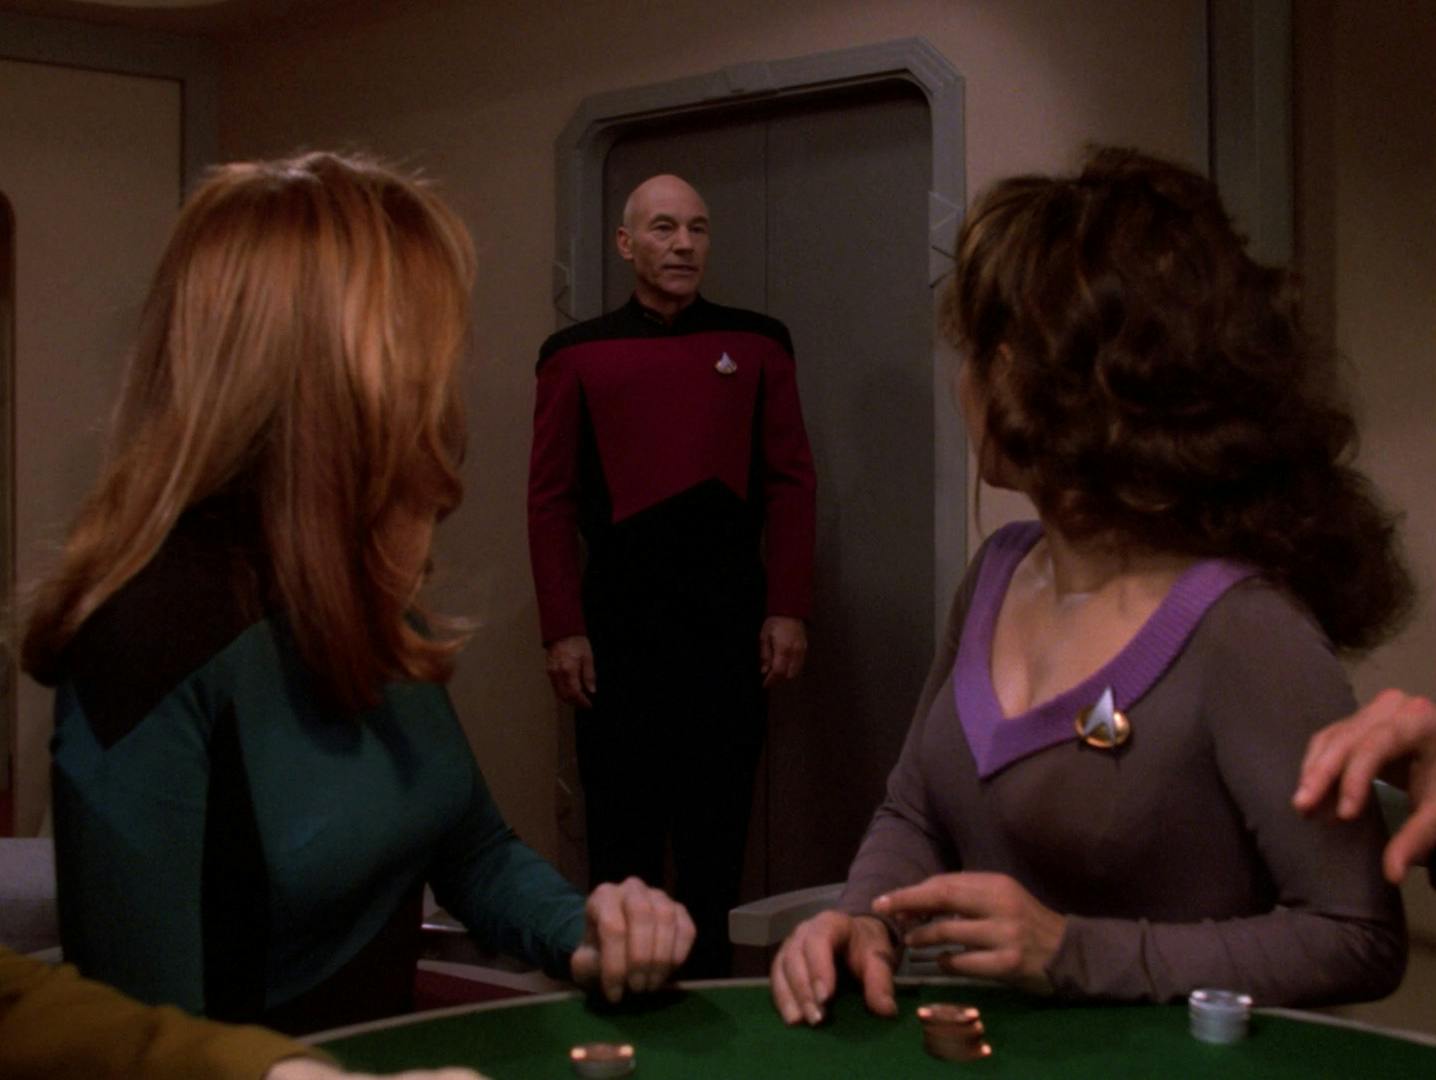 Picard enters crew quarters and asks his senior staff if he can join them for their game of poker in 'All Good Things...'